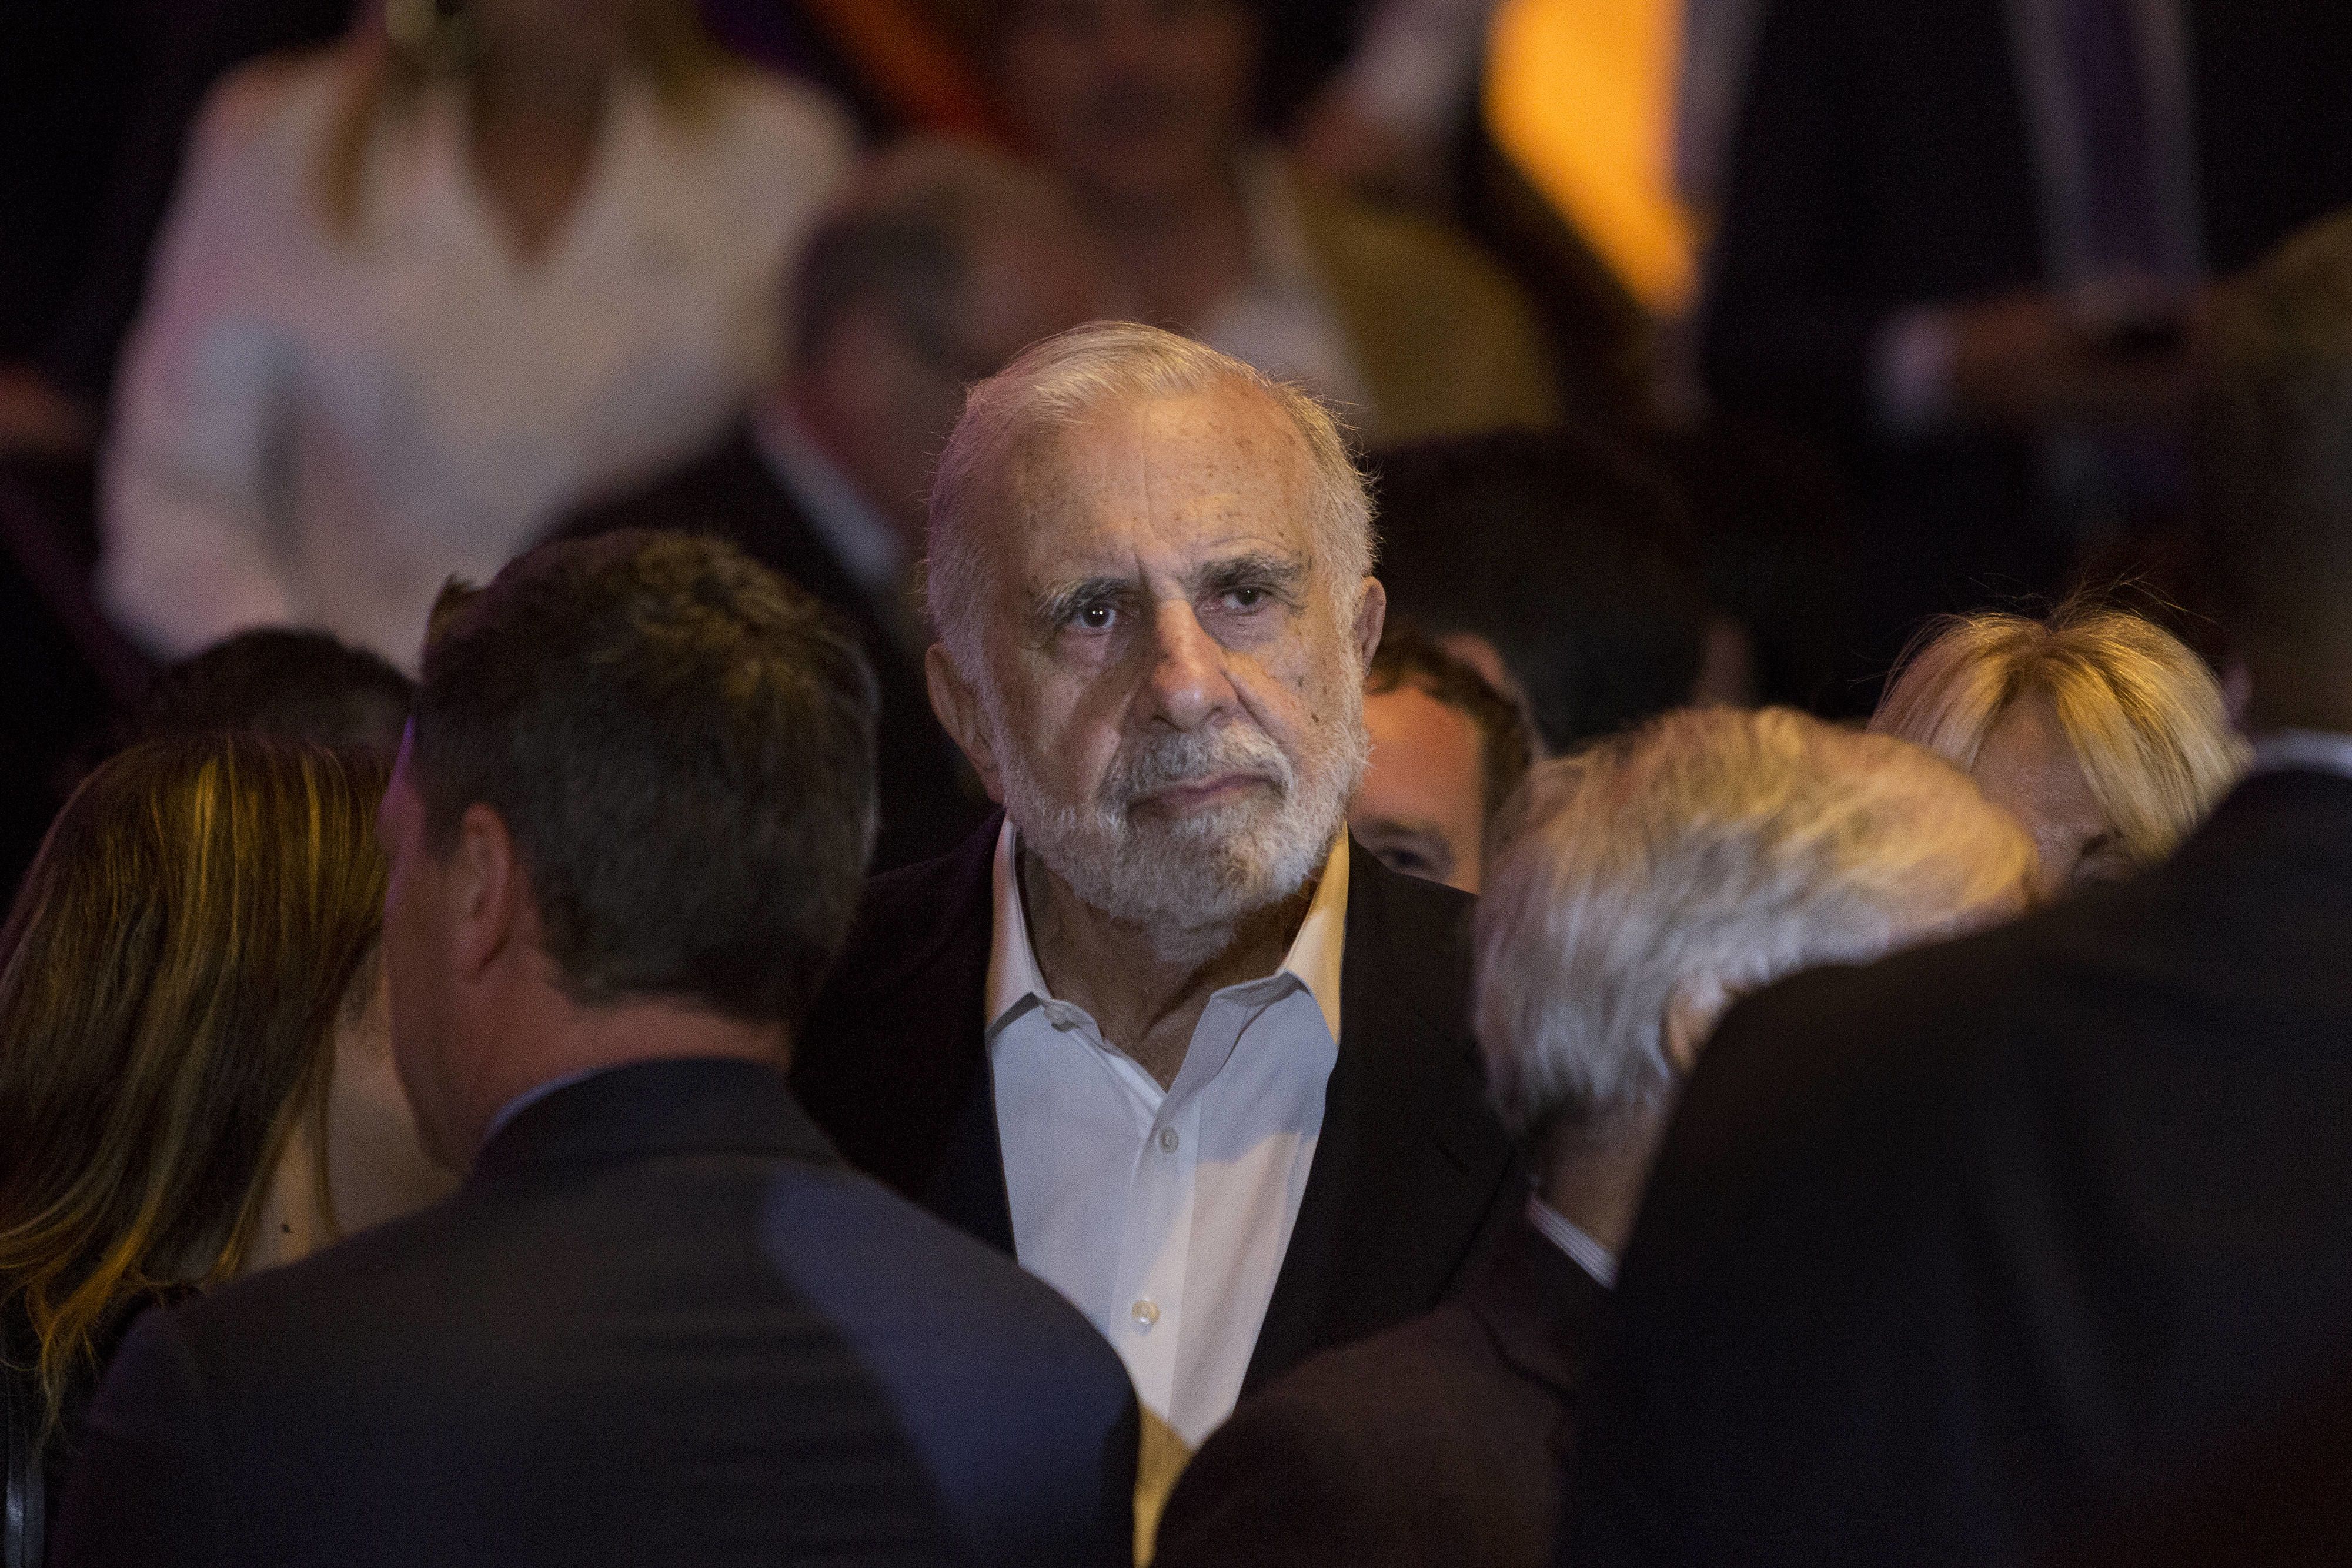 Carl Icahn’s son Brett is the main candidate to take over his hedge fund